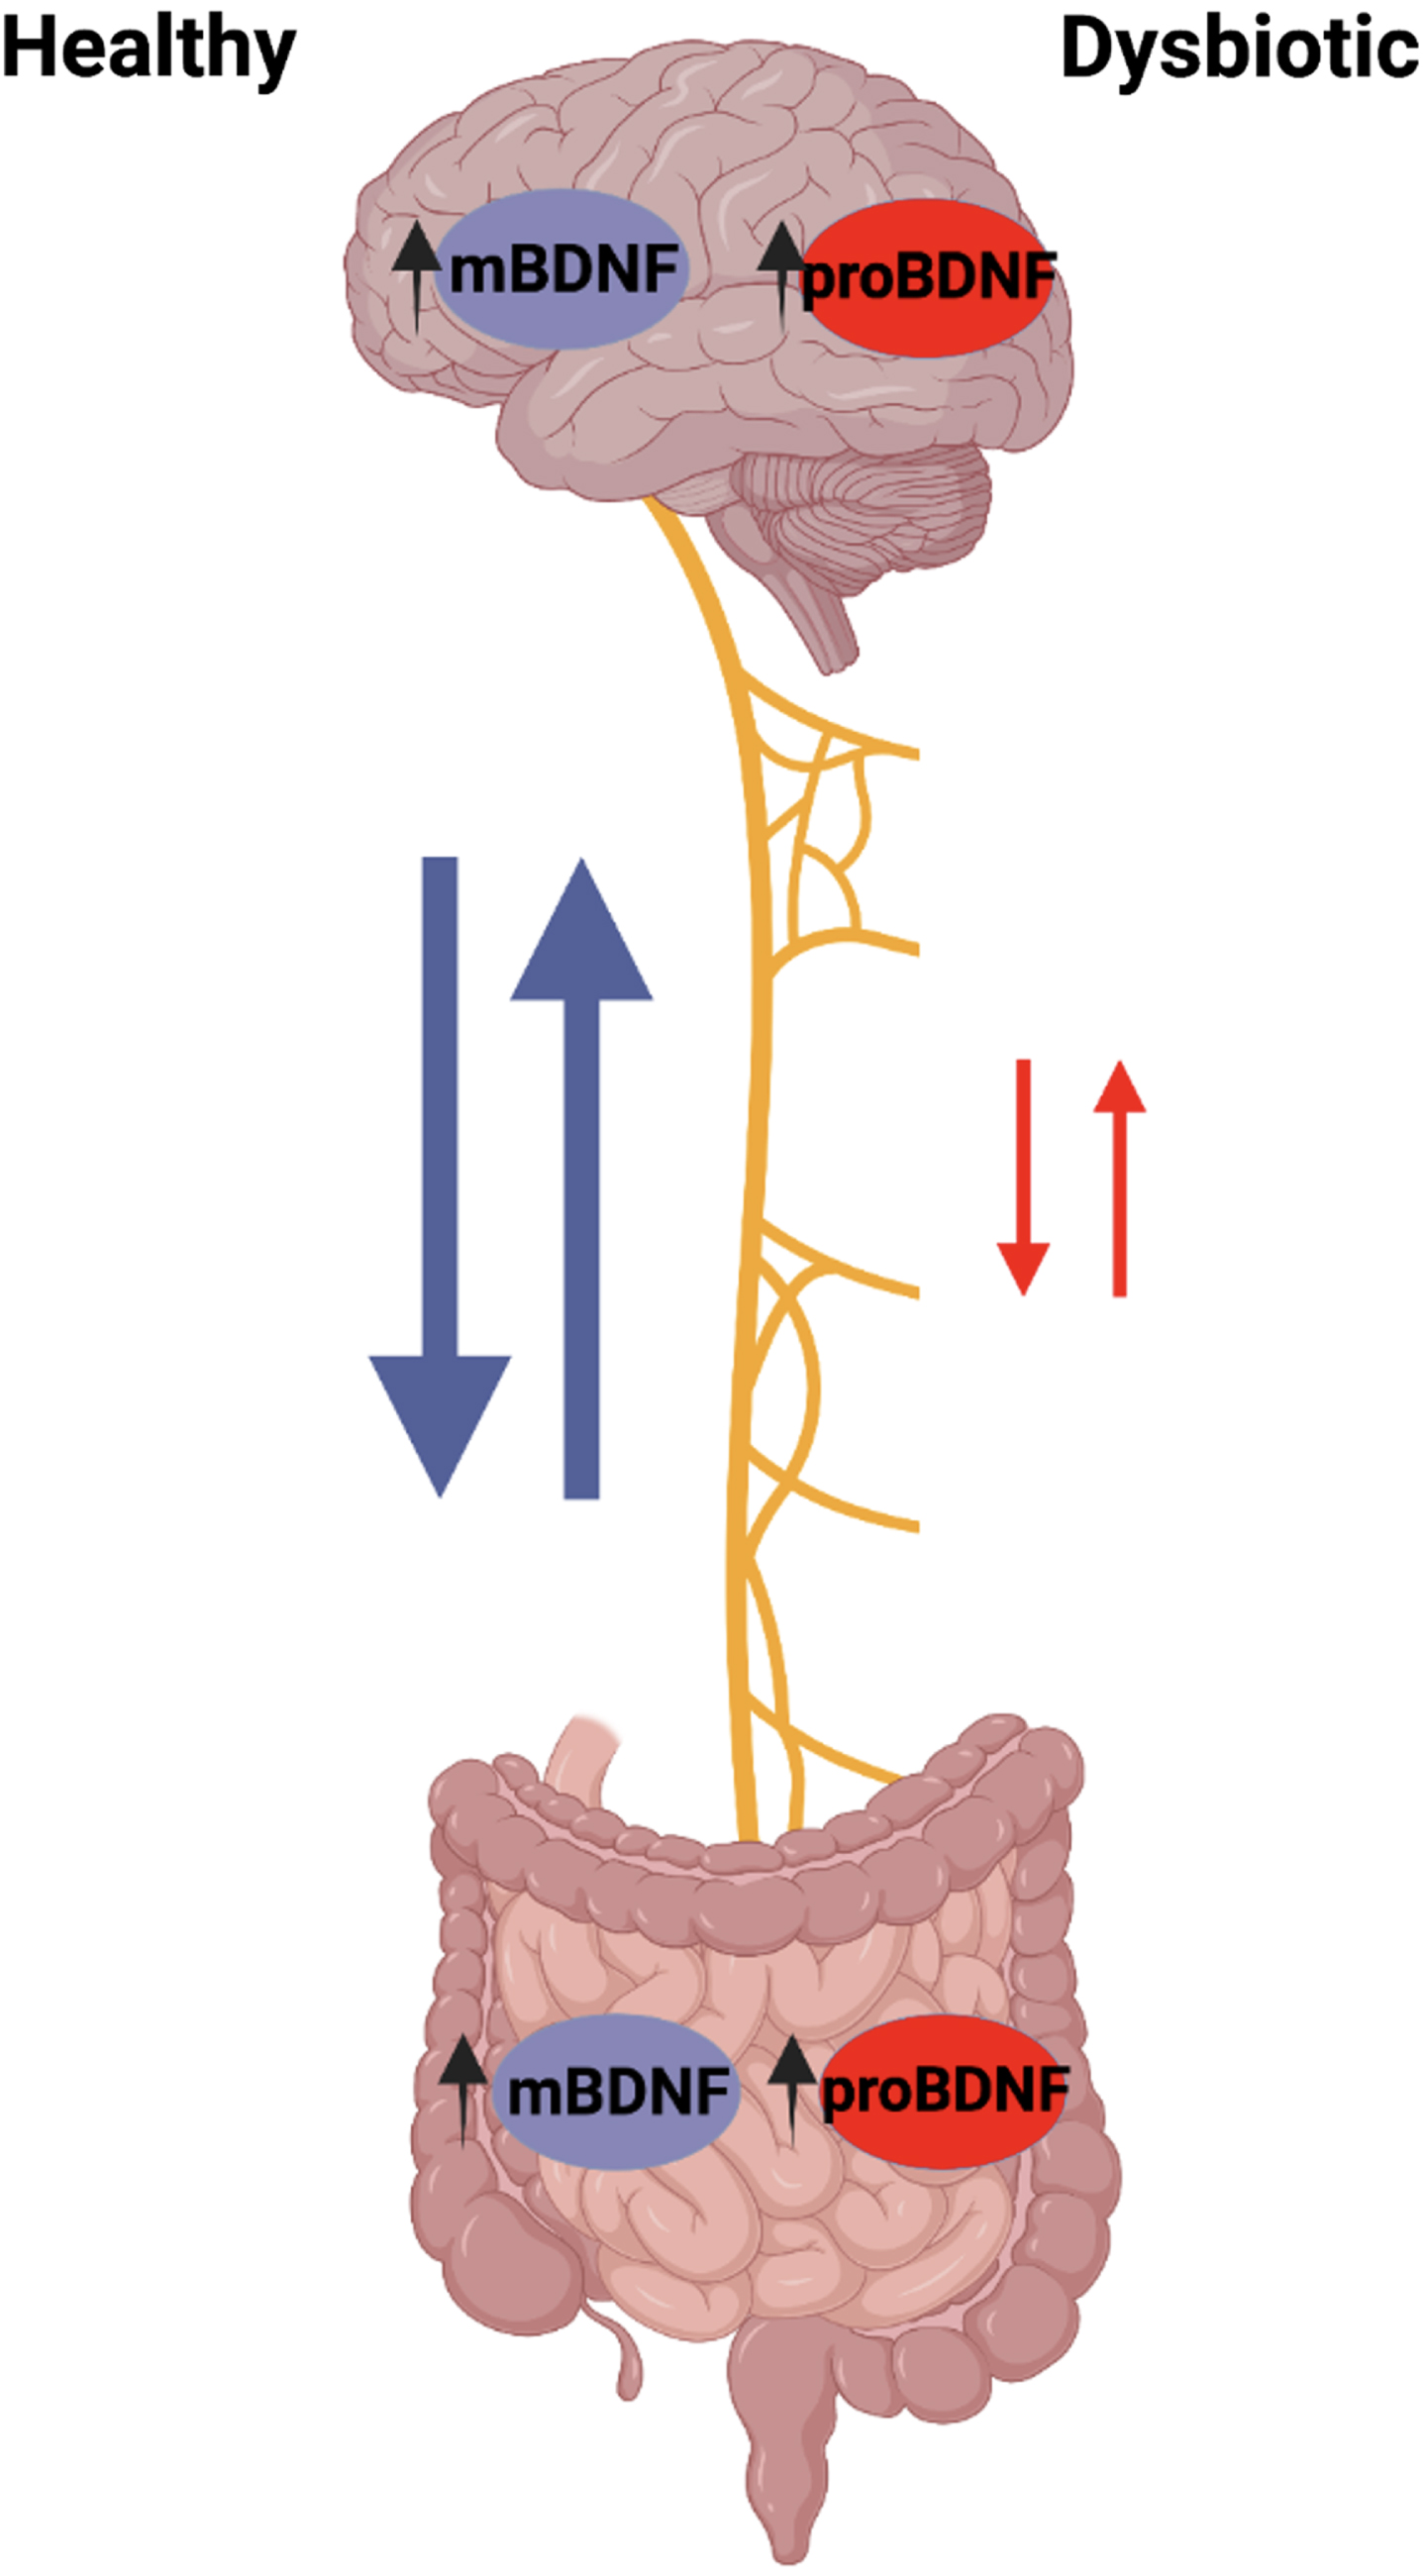 The neural summary of the gut-brain axis. Gut endocrine cells are activated by mature mBDNF or inhibited by proBDNF, which in turn activate or inhibit vagal nerve communication to the brain respectively. Additionally, afferent vagal nerve fibers stimulate efferent vagal nerve fibers via the inflammatory reflex.